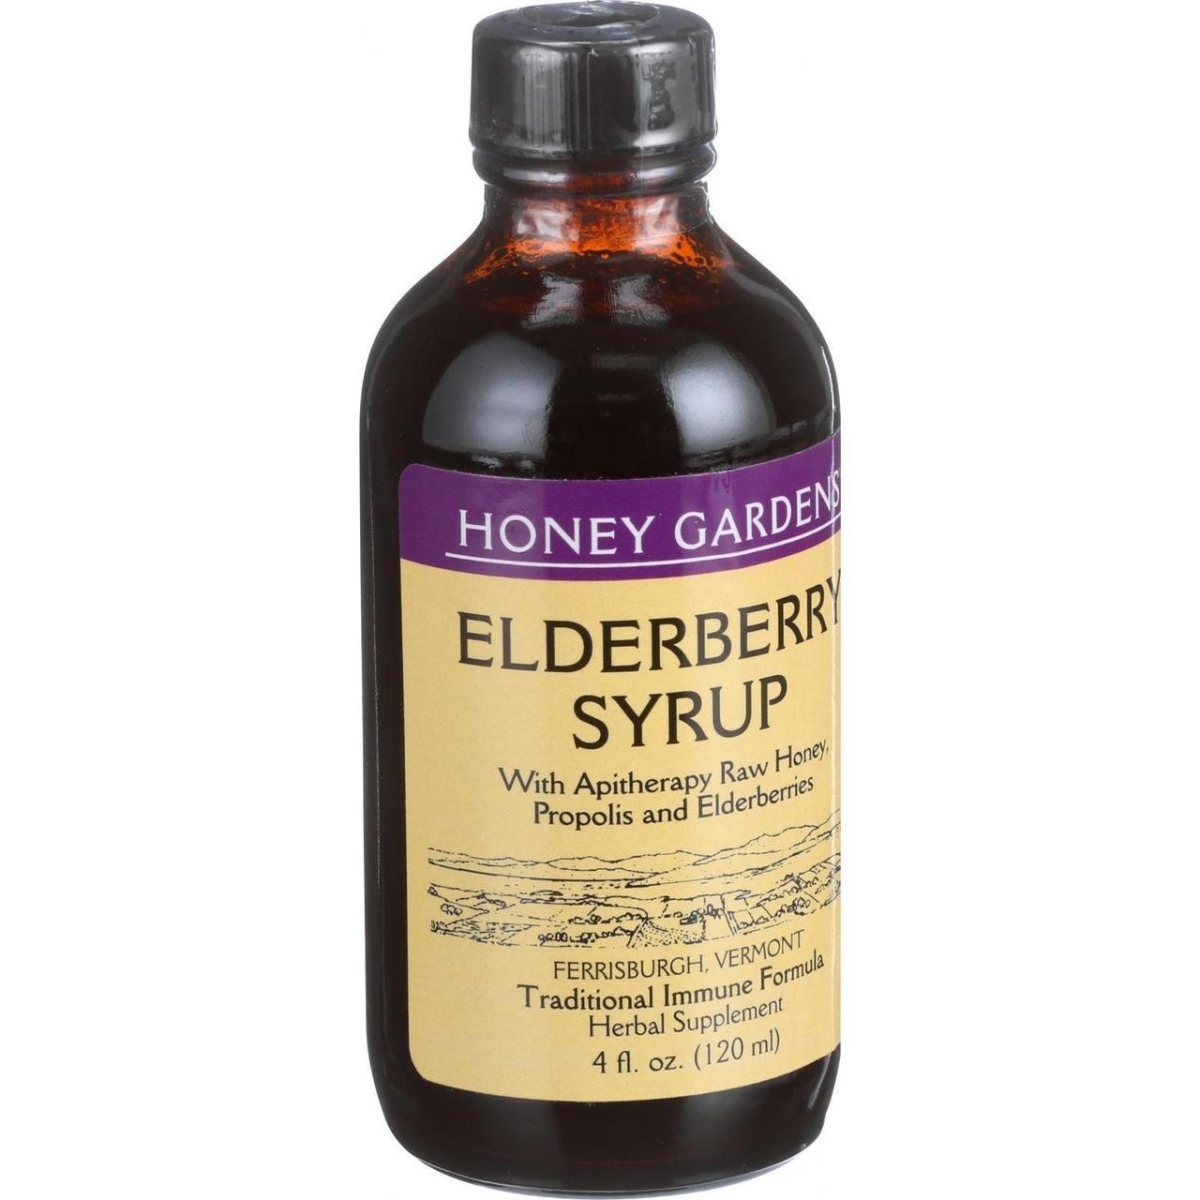 Hg0311498 4 Oz Elderberry Syrup With Apitherapy Raw Honey, Propolis & Elderberries - Cough